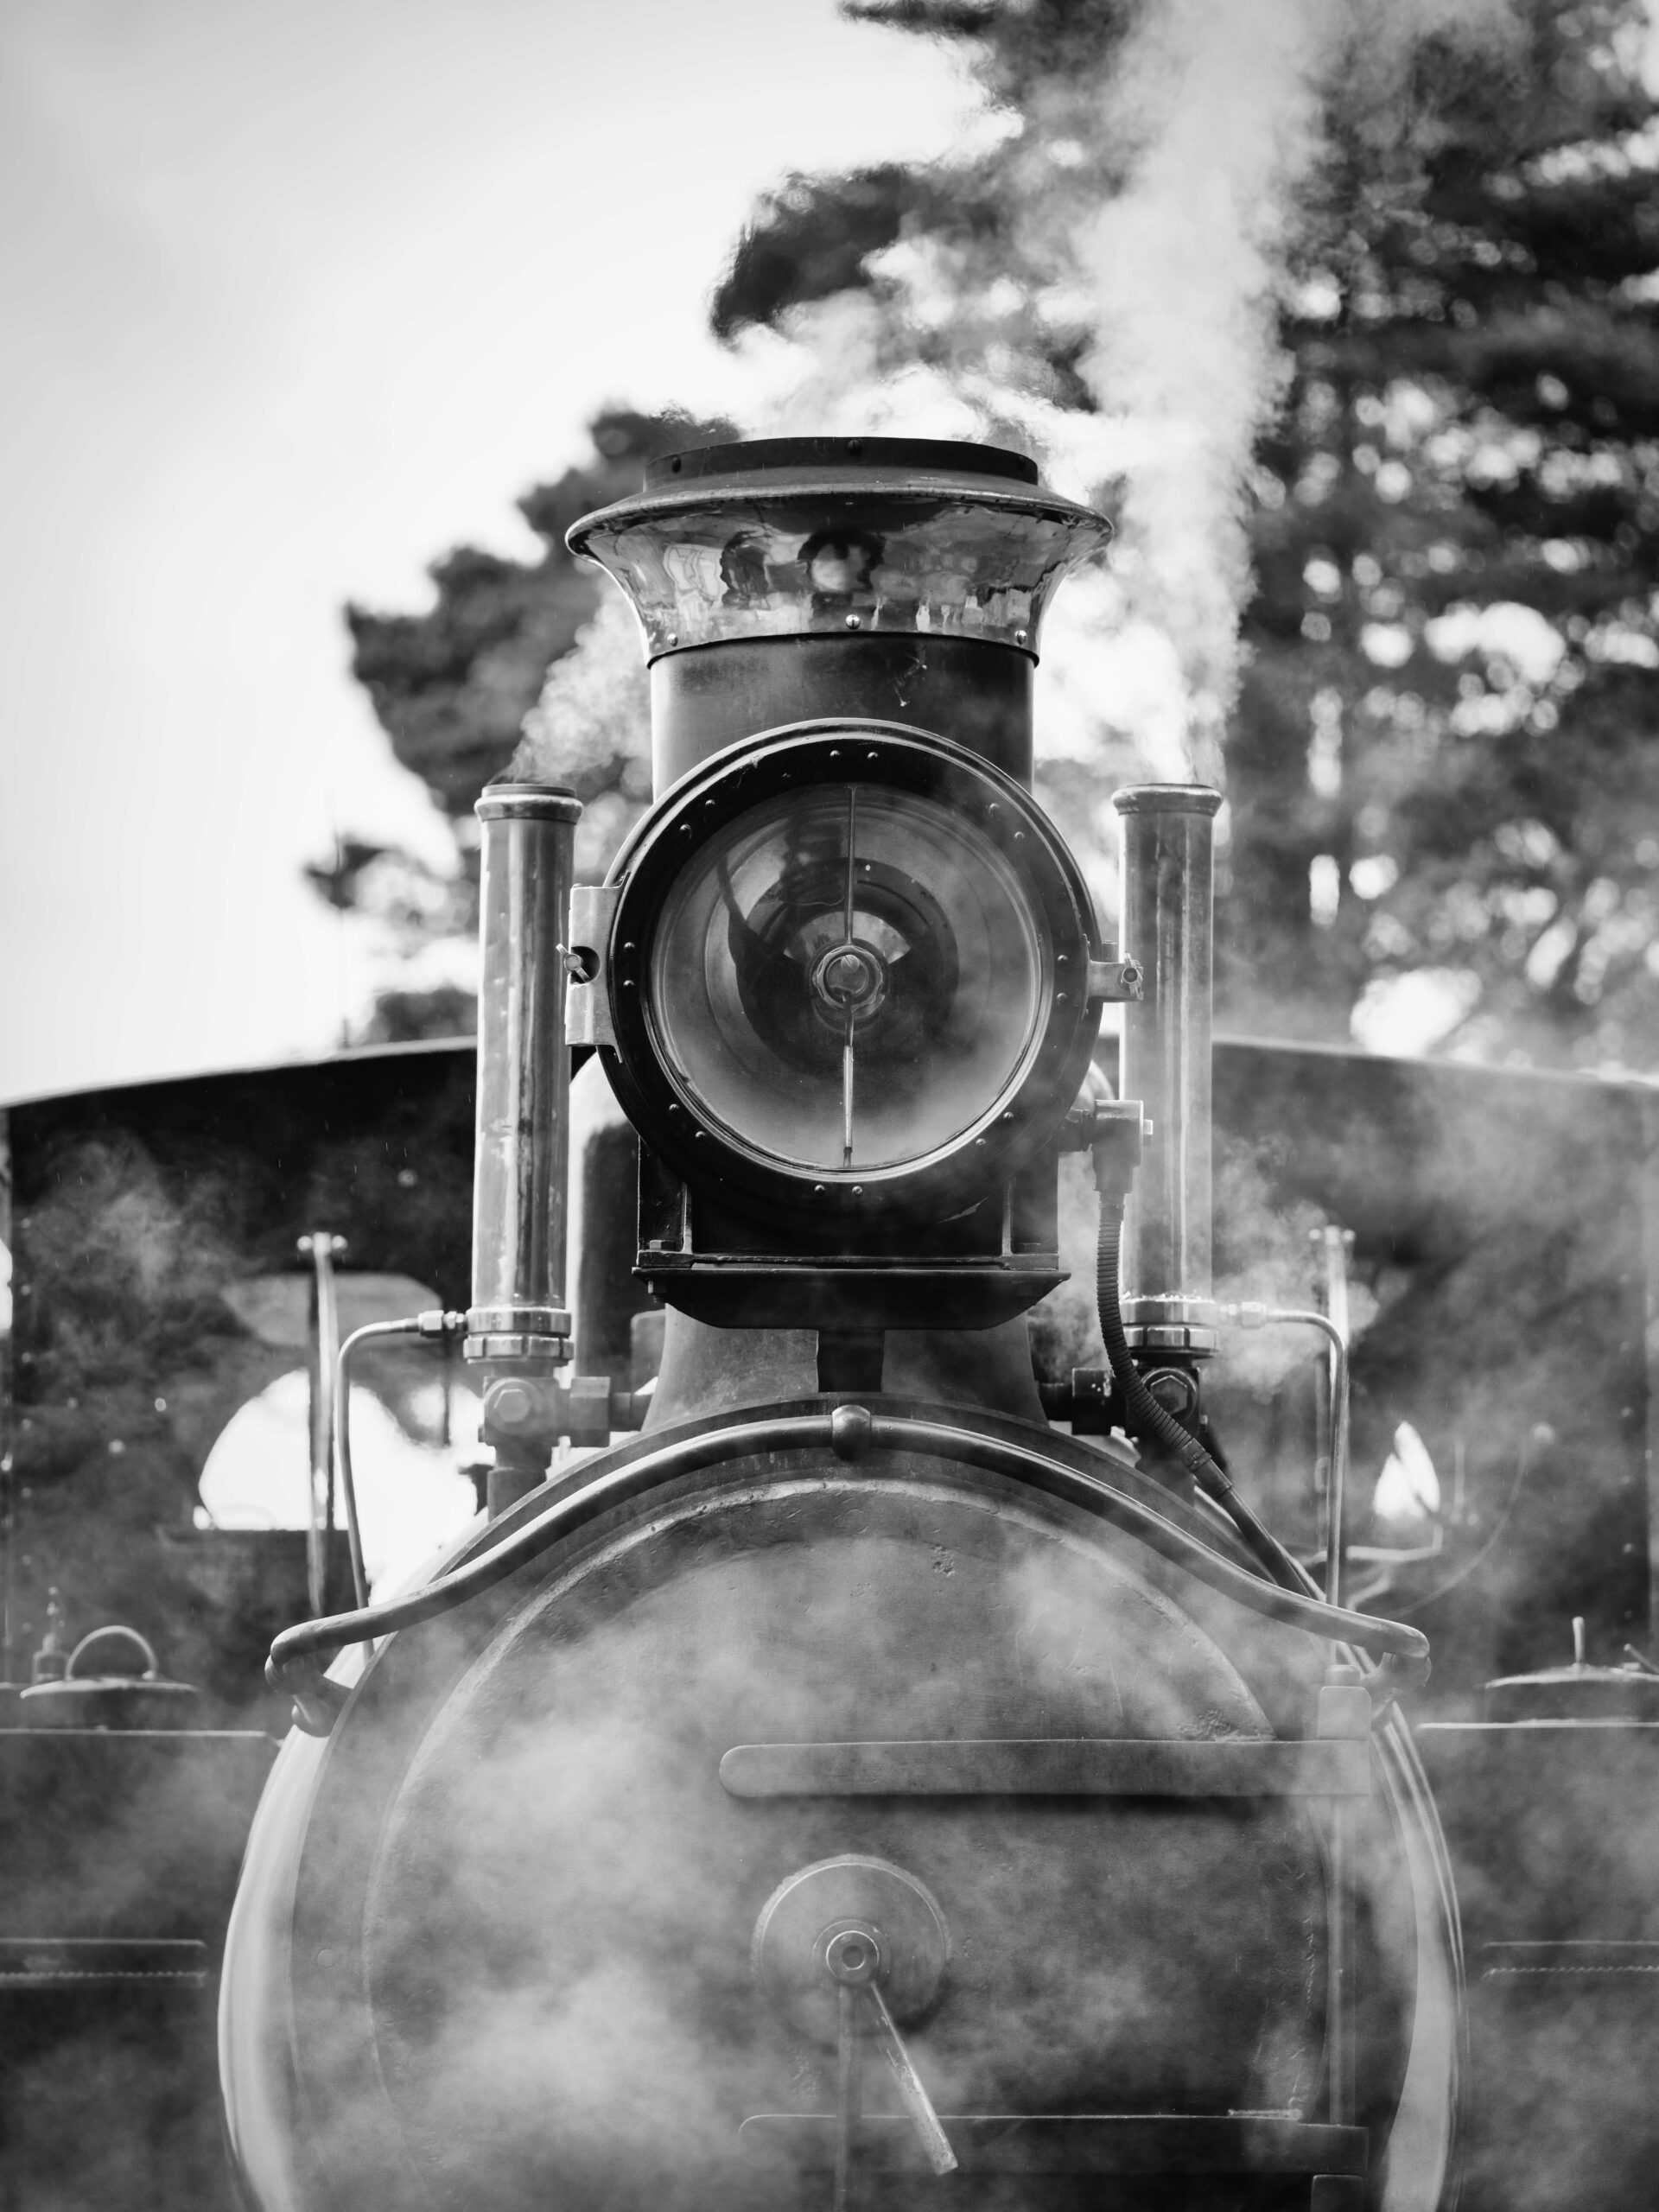 A locomotive sits outside with gum trees in the background, quietly steaming